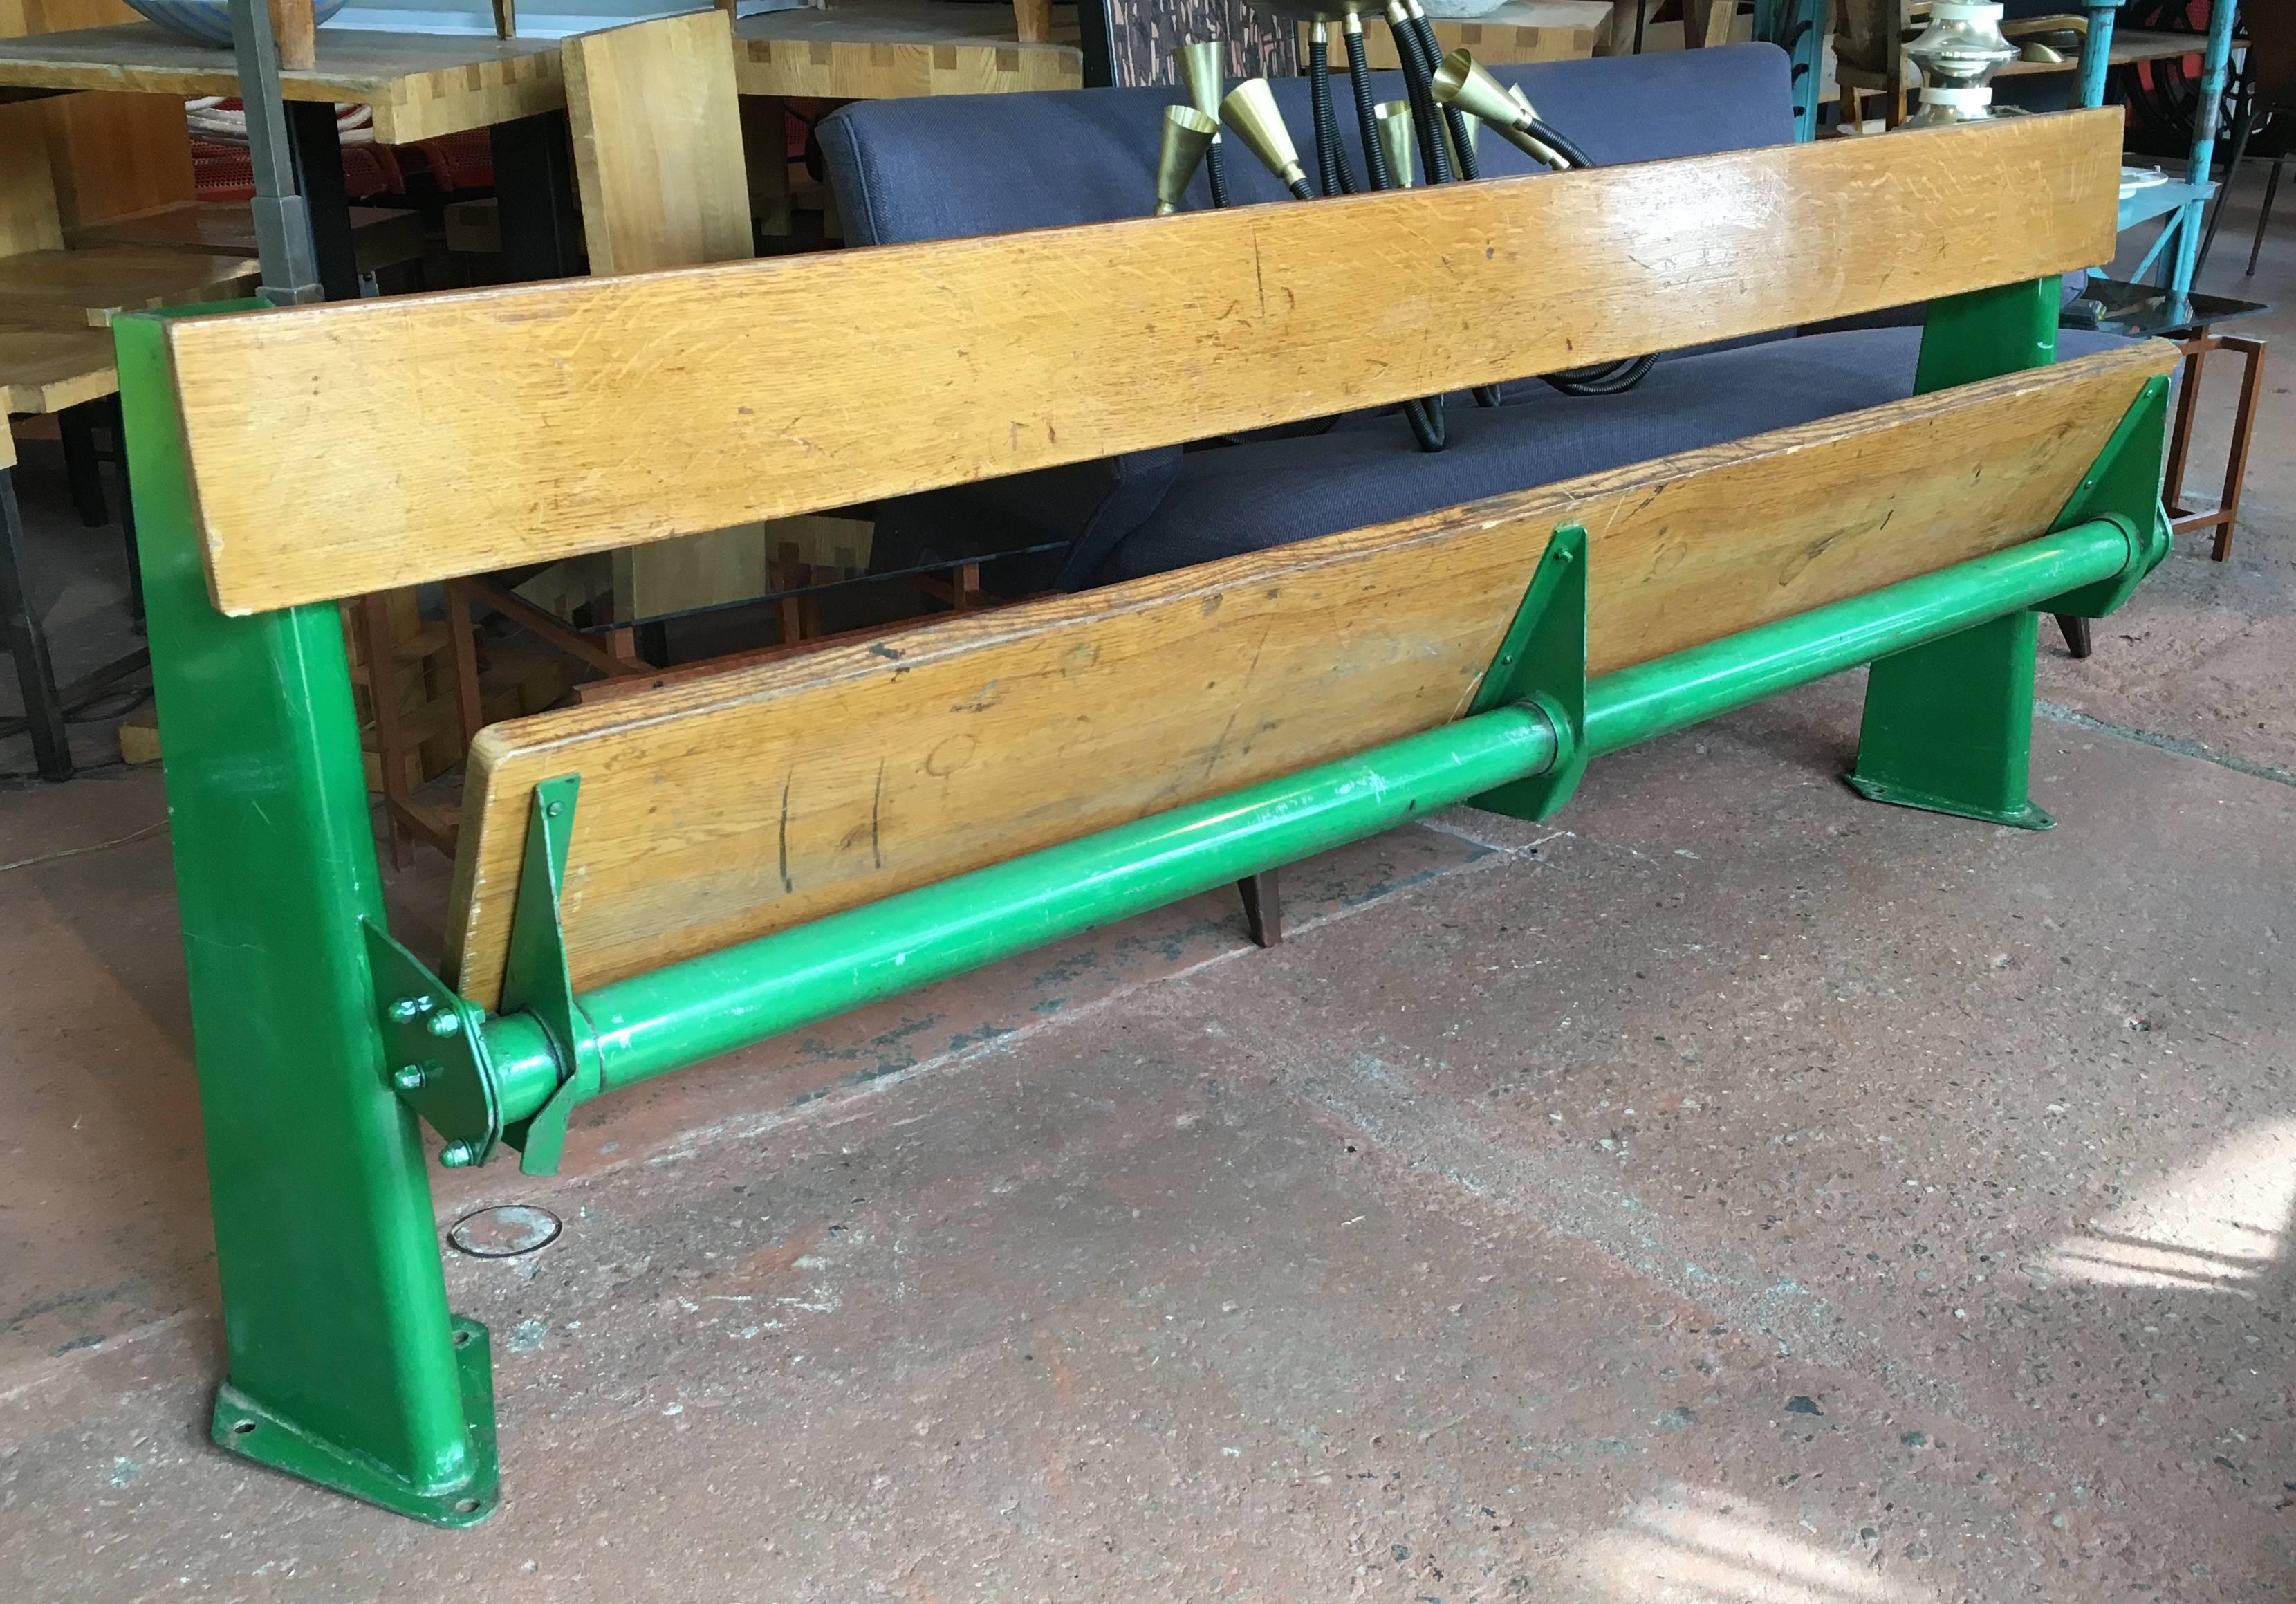 Rare Jean Prouve bench from the back row of the University of Paris Medical School Auditorium, circa 1957, in completely original condition, original green paint, single plank seat which fold up. This version is rare, only a handful made for the